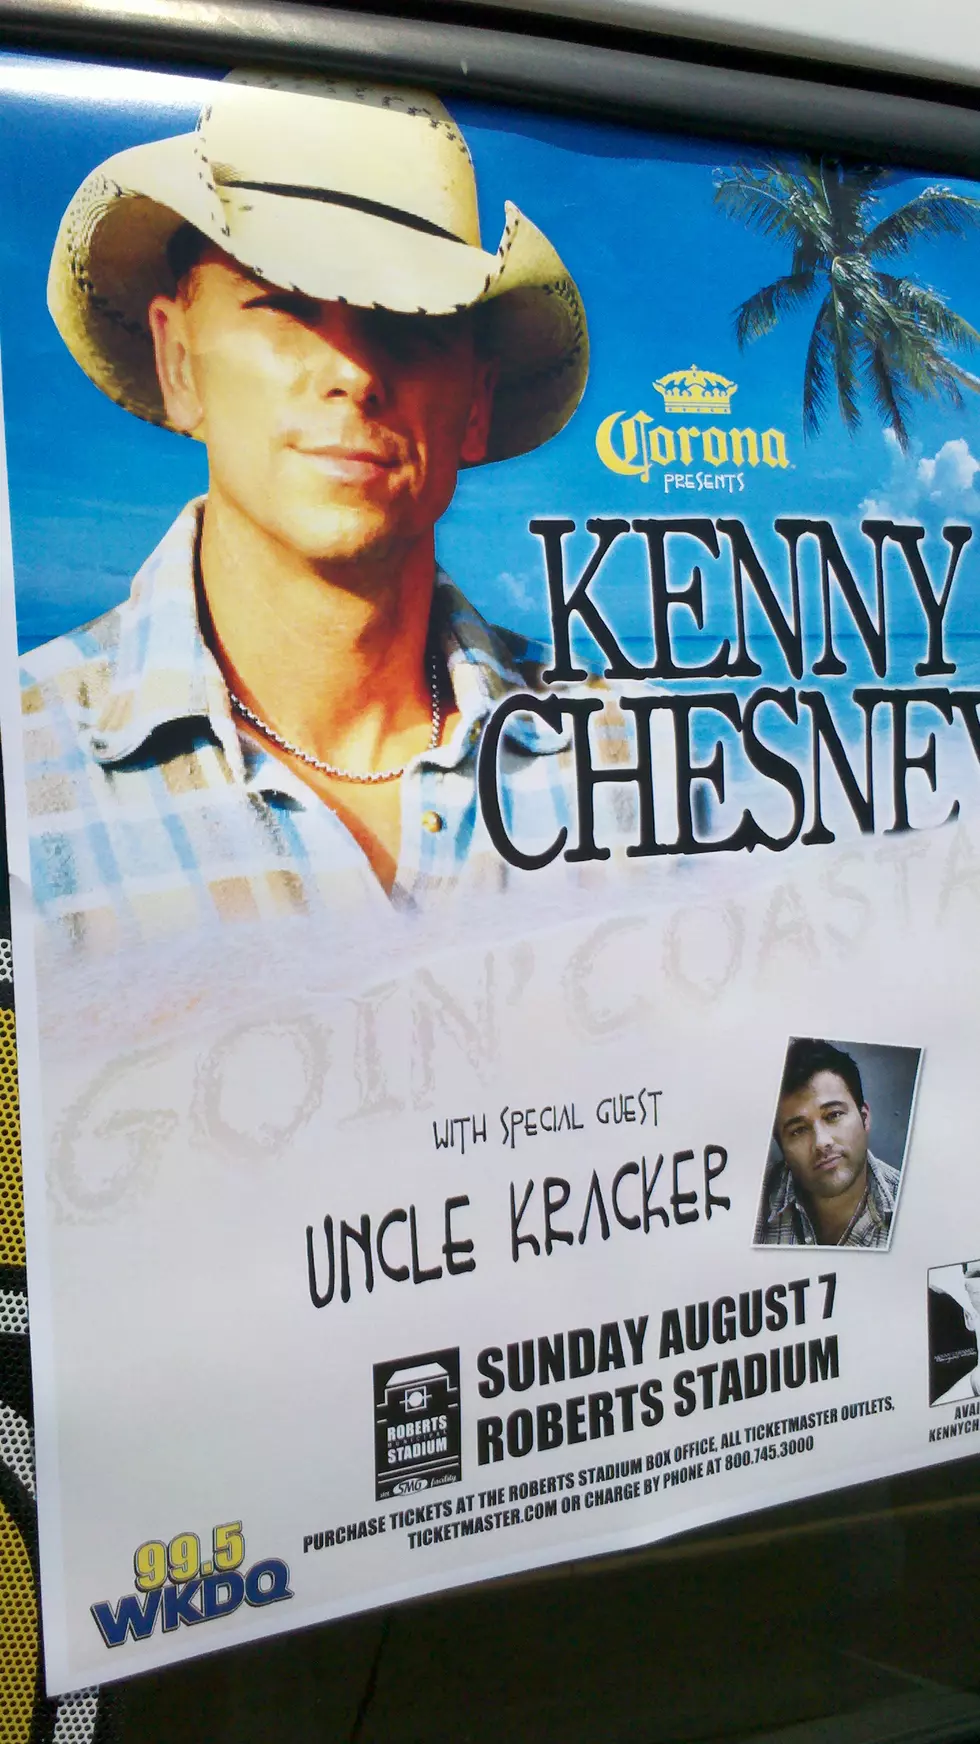 Free Lunch Friday And Kenny Chesney On-Sale At Roberts Stadium